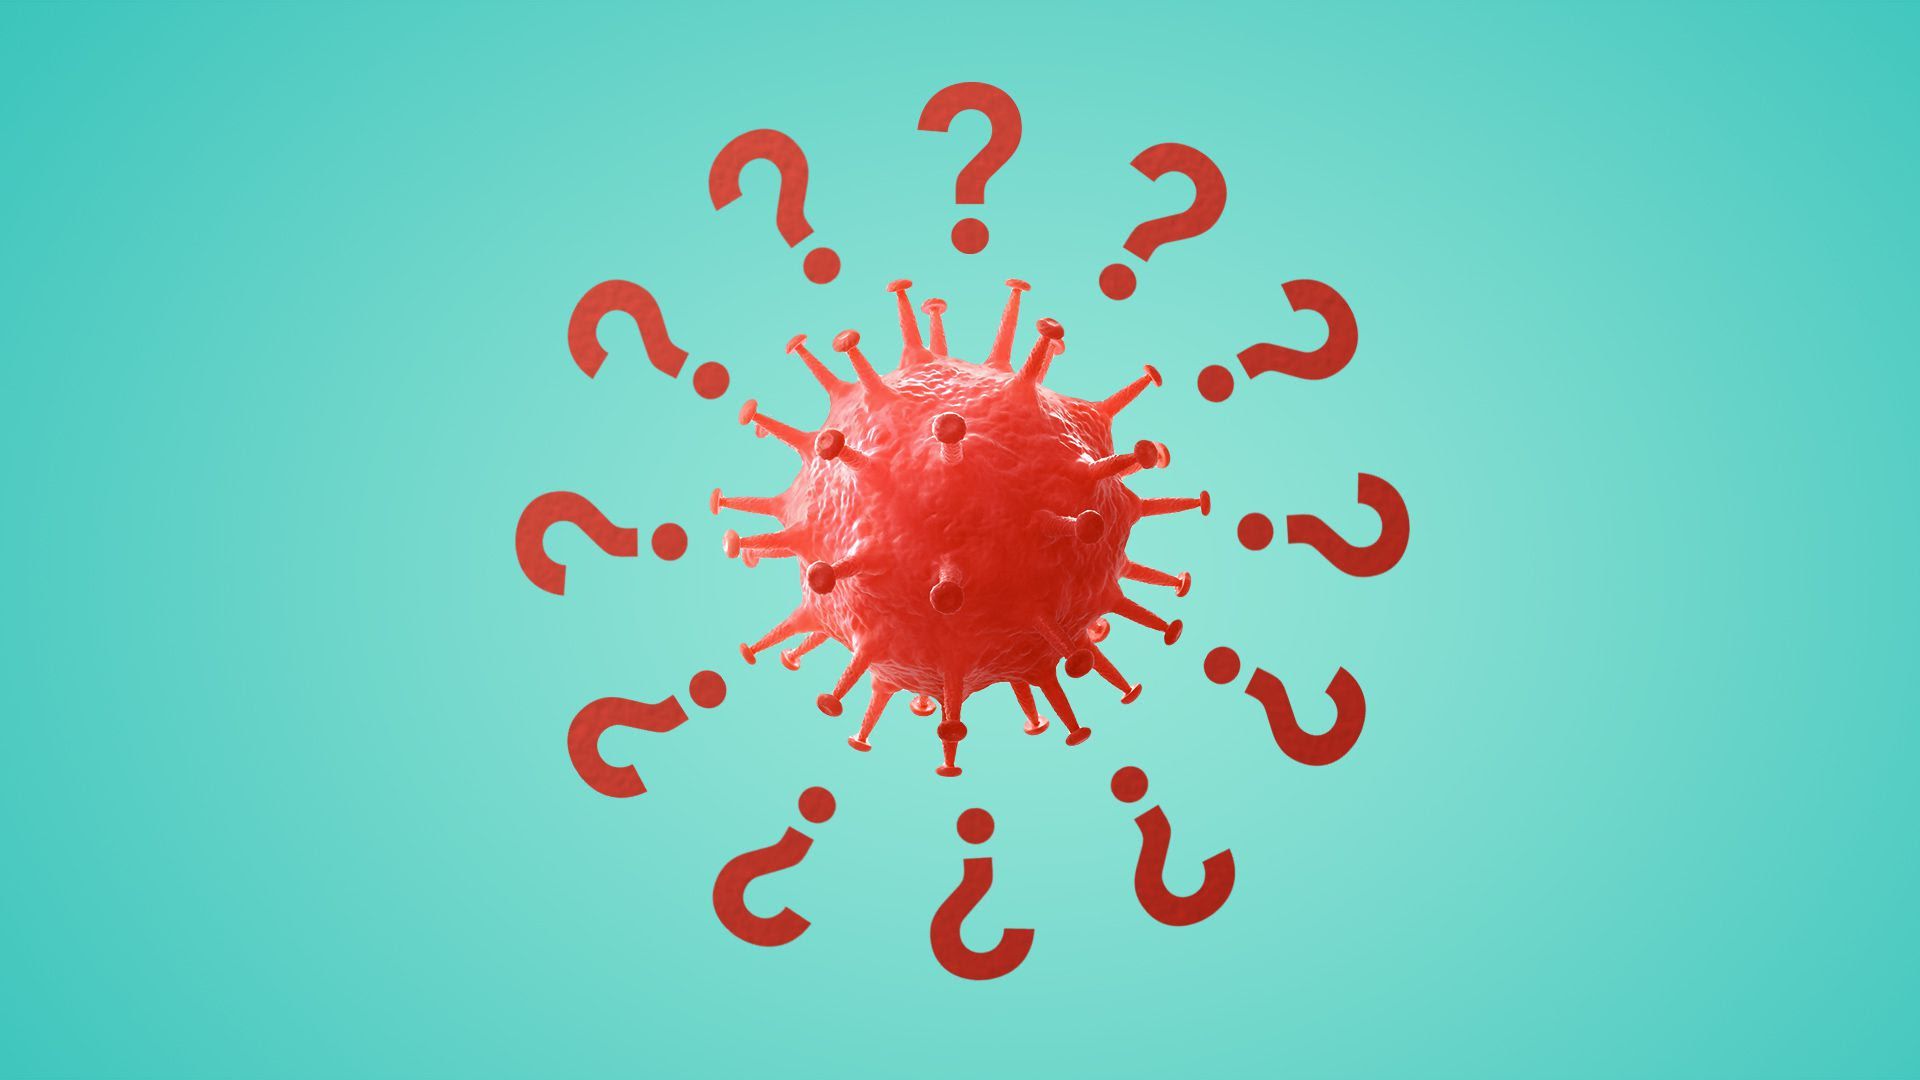 Illustration of virus surrounded by question marks